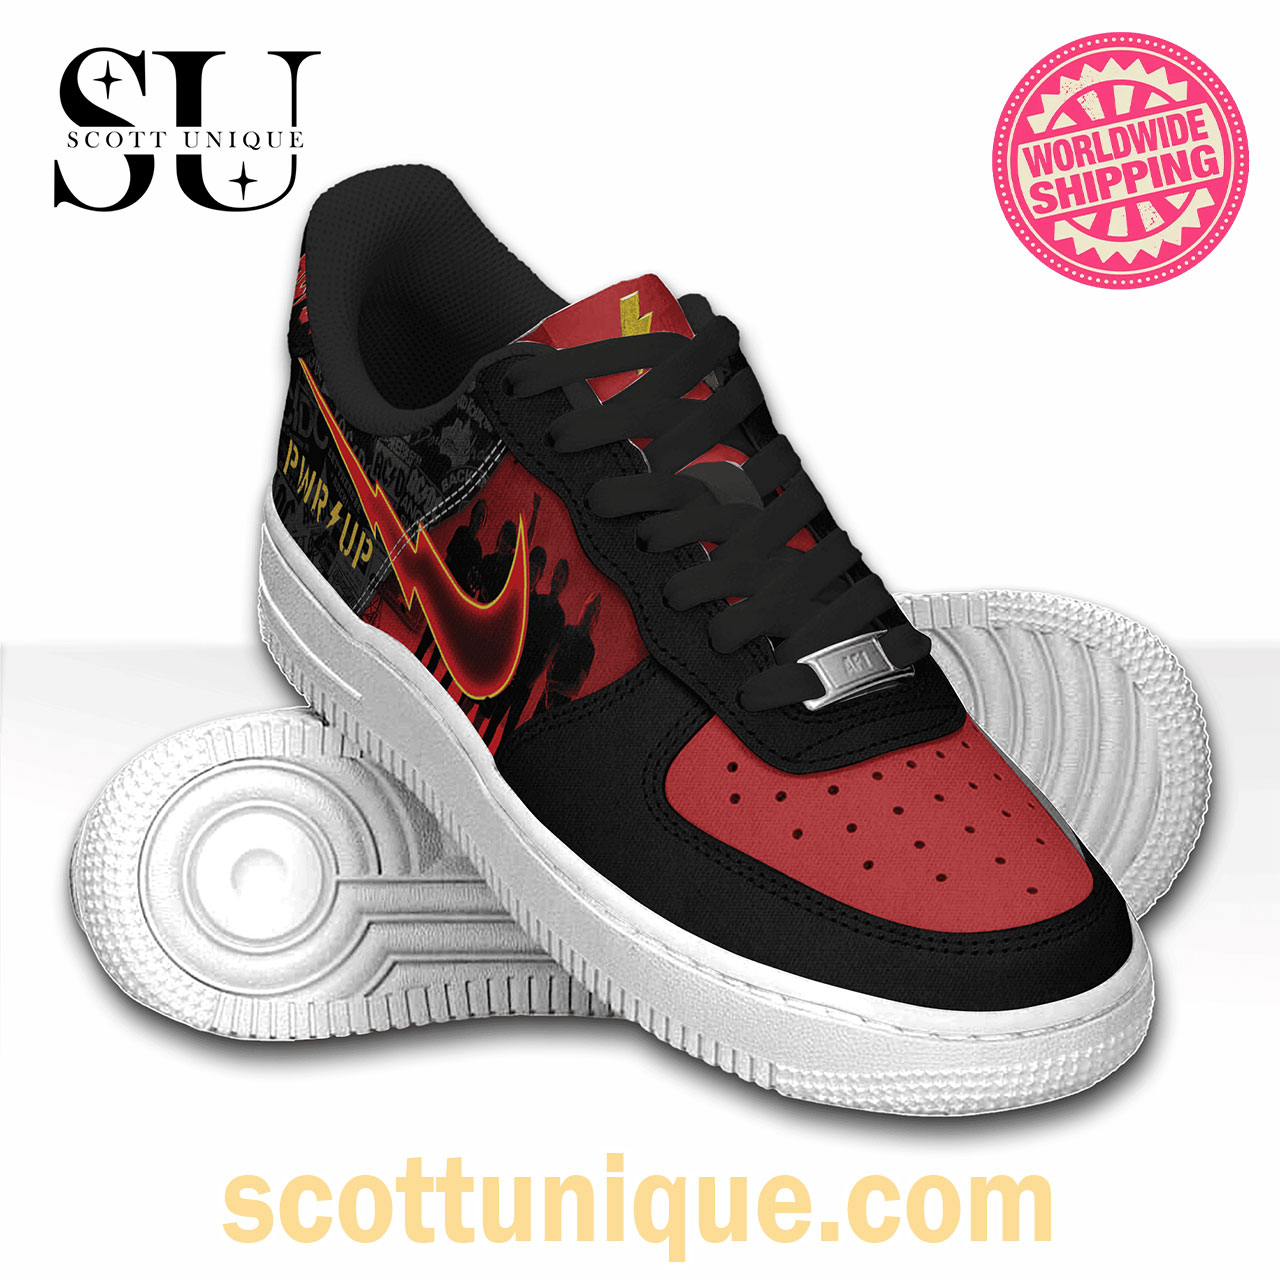 ACDC TOUR PWR UP Premium Nike Air Force 1 Shoes